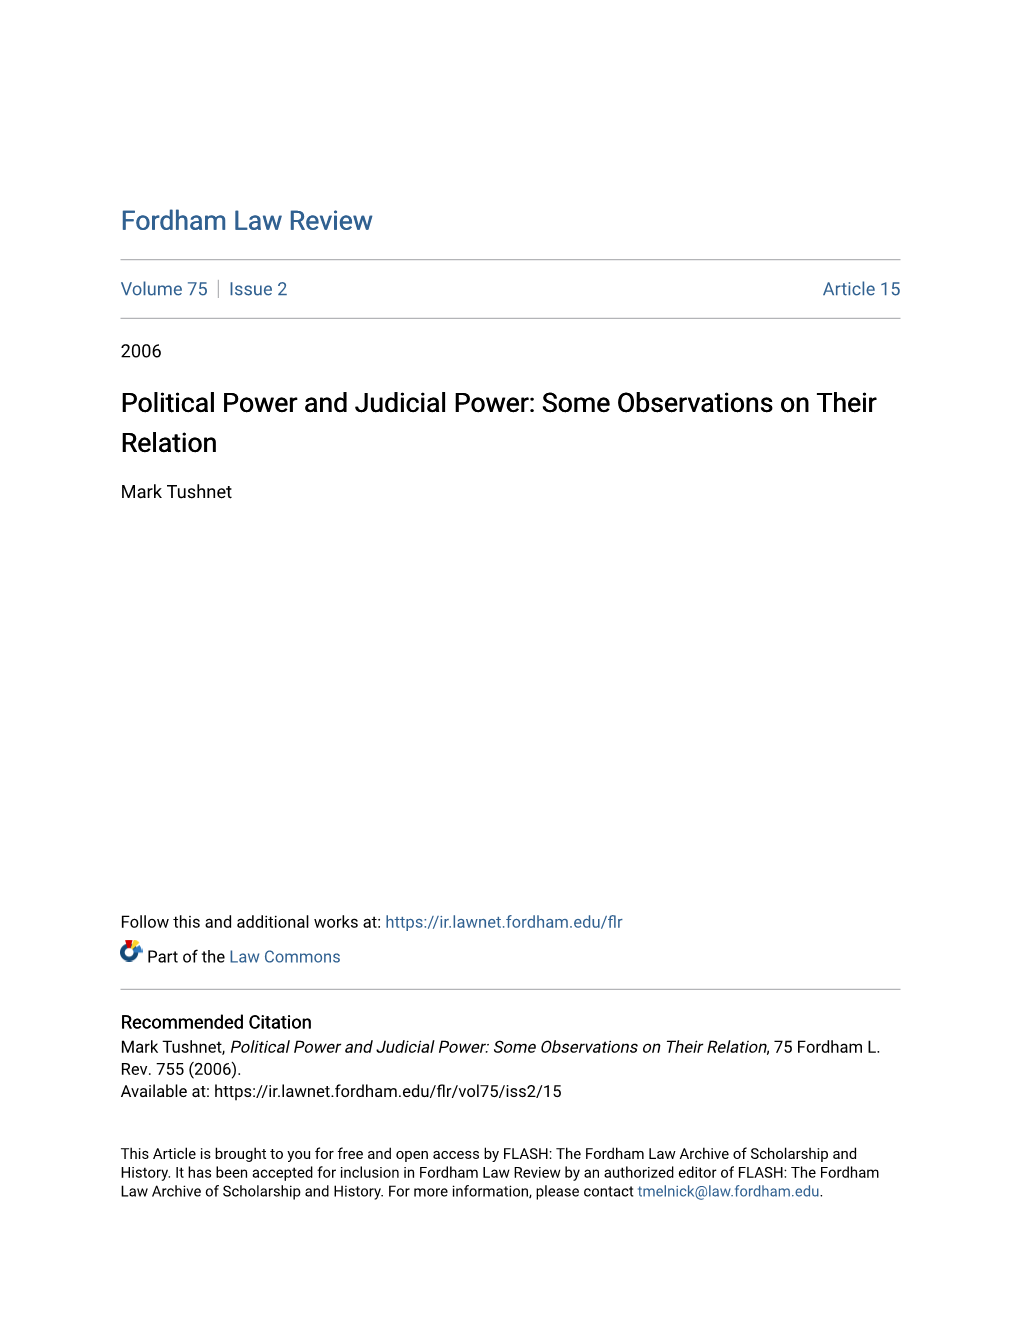 Political Power and Judicial Power: Some Observations on Their Relation